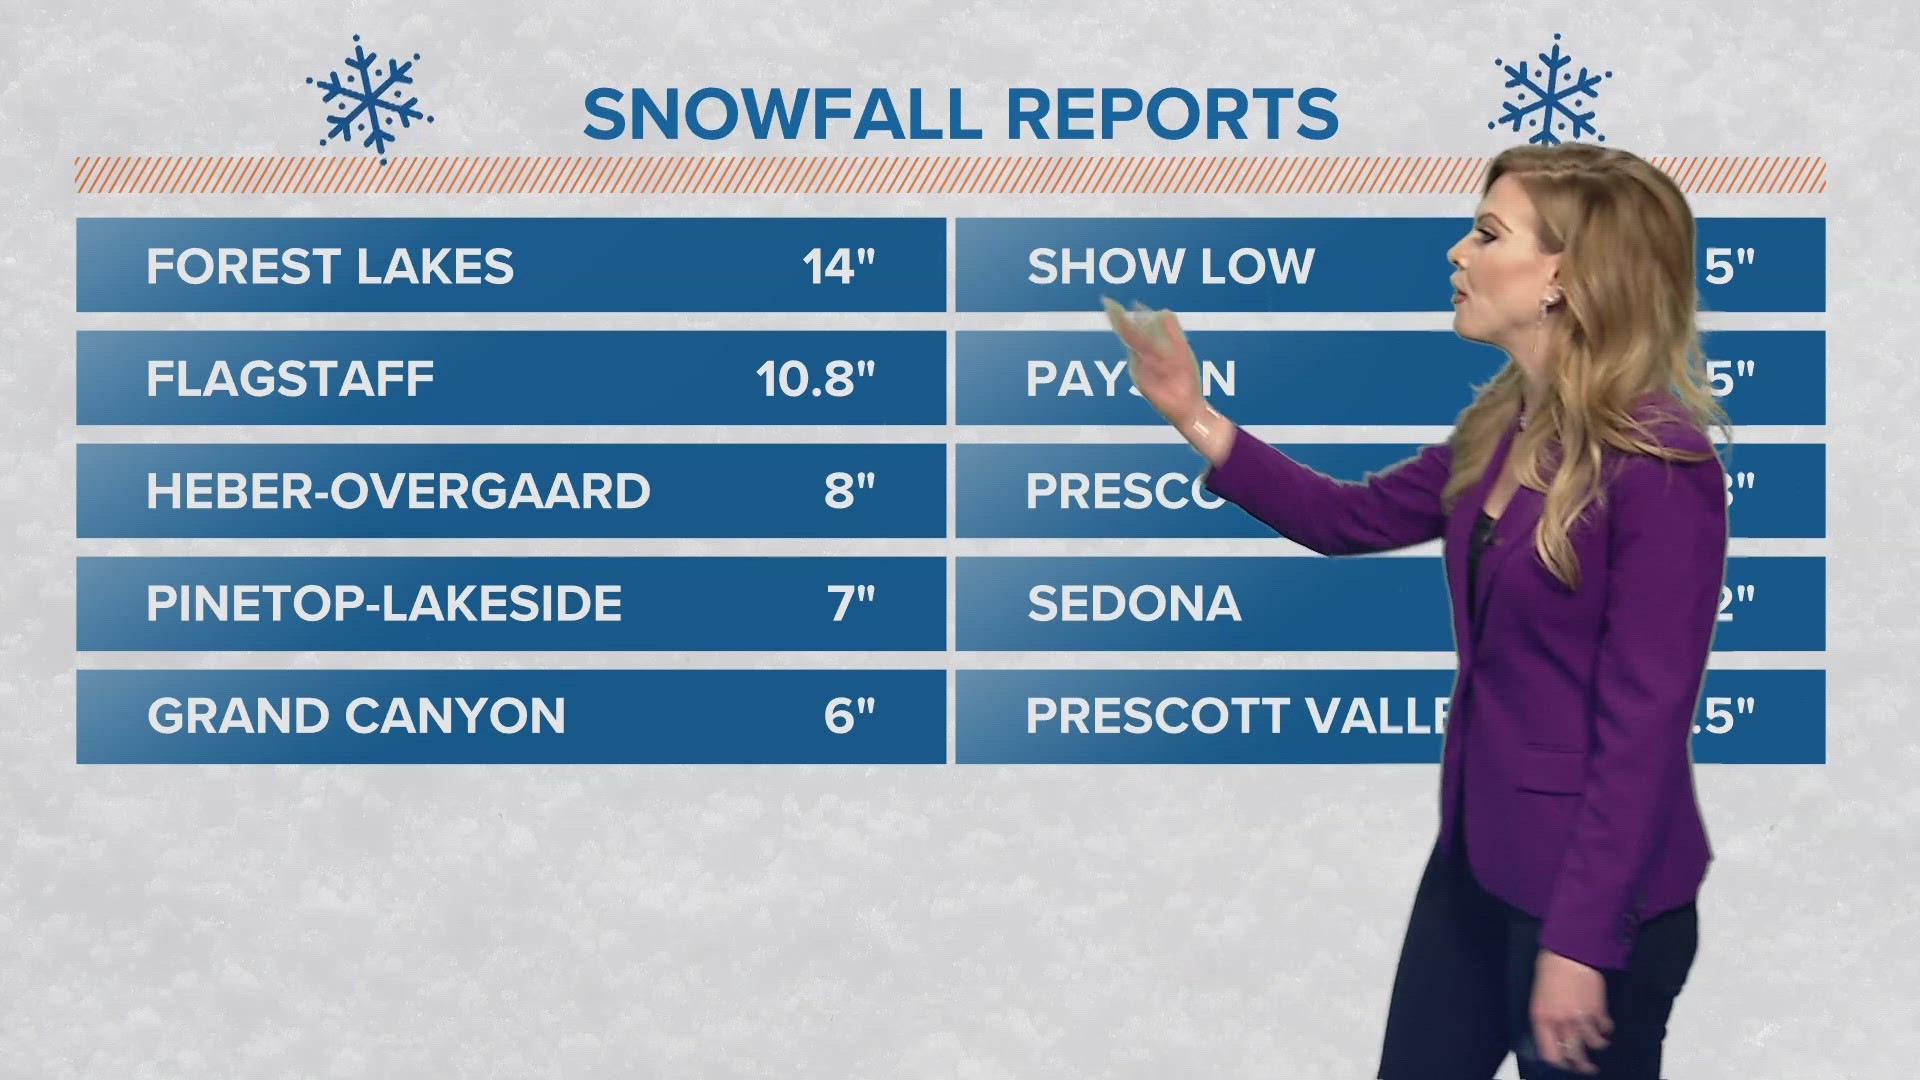 Krystle Henderson has a breakdown of the snow totals from across the state after a winter storm moved across Arizona this weekend.